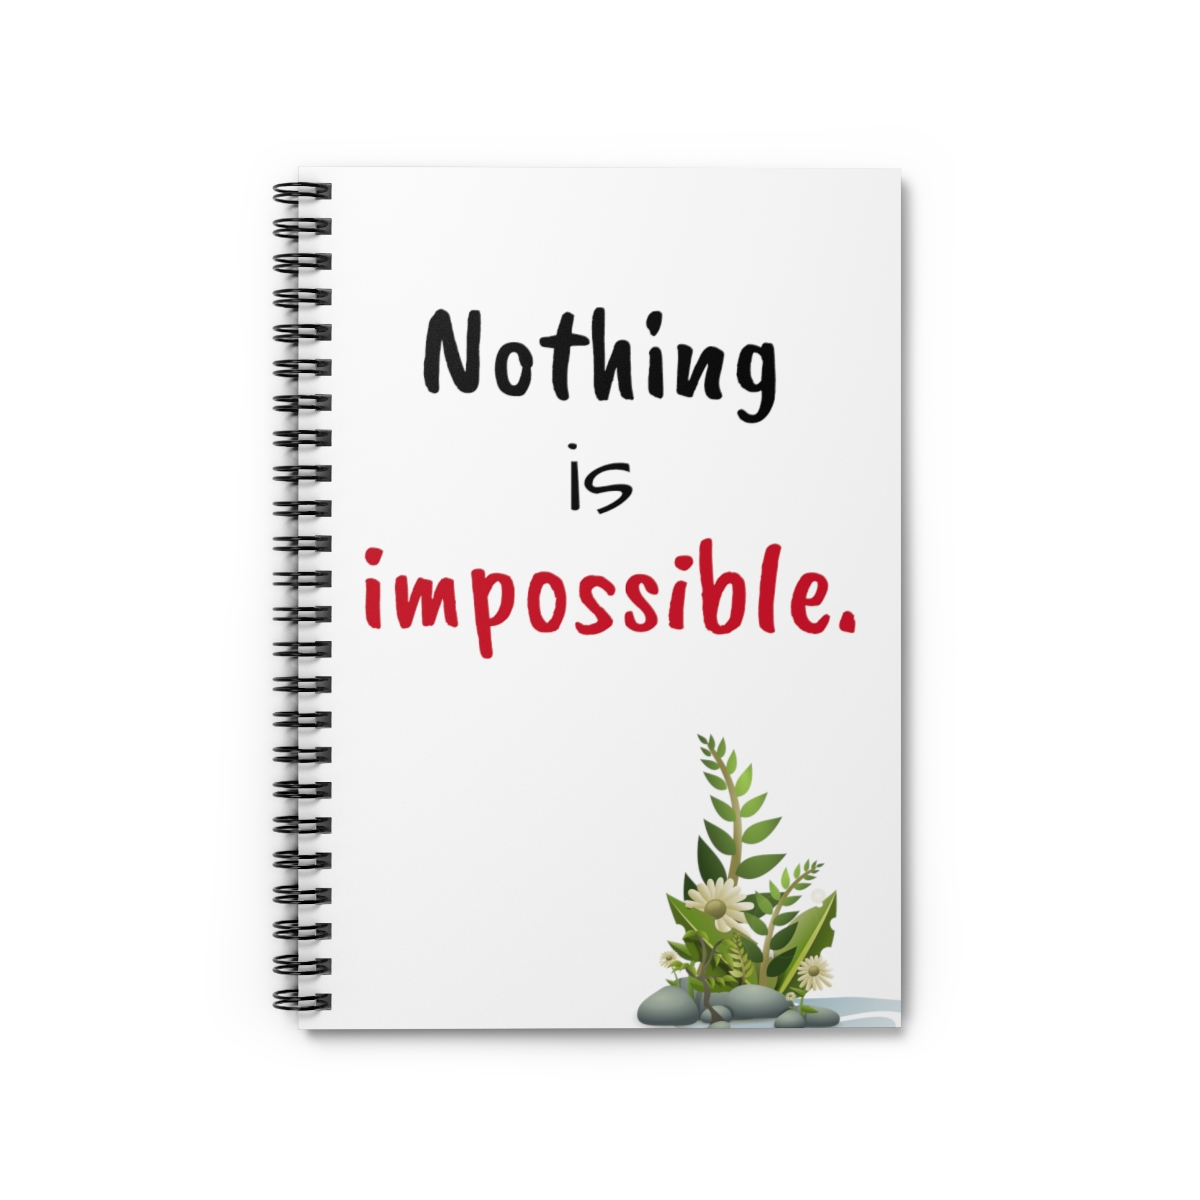 Nothing is Impossible Spiral Notebook | Ruled Line | Personalized